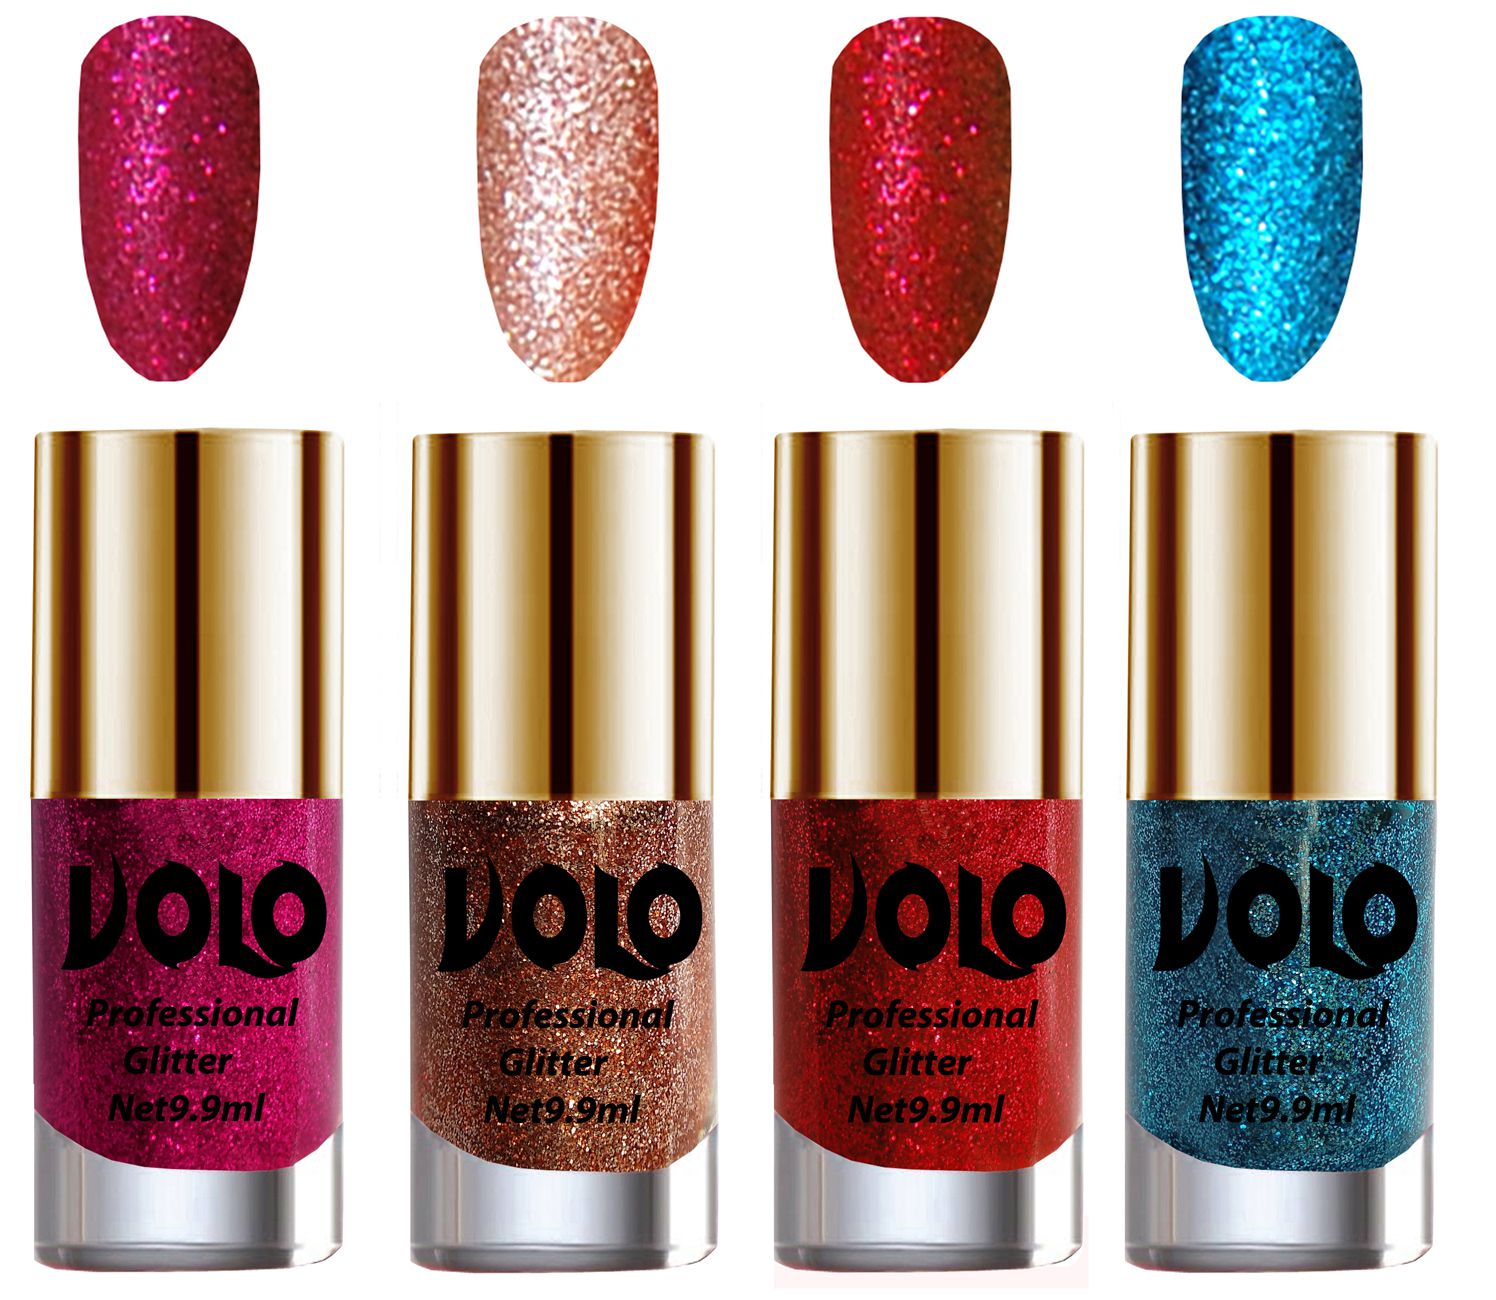     			VOLO Professionally Used Glitter Shine Nail Polish Magenta,Peach,Red Blue Pack of 4 39 mL